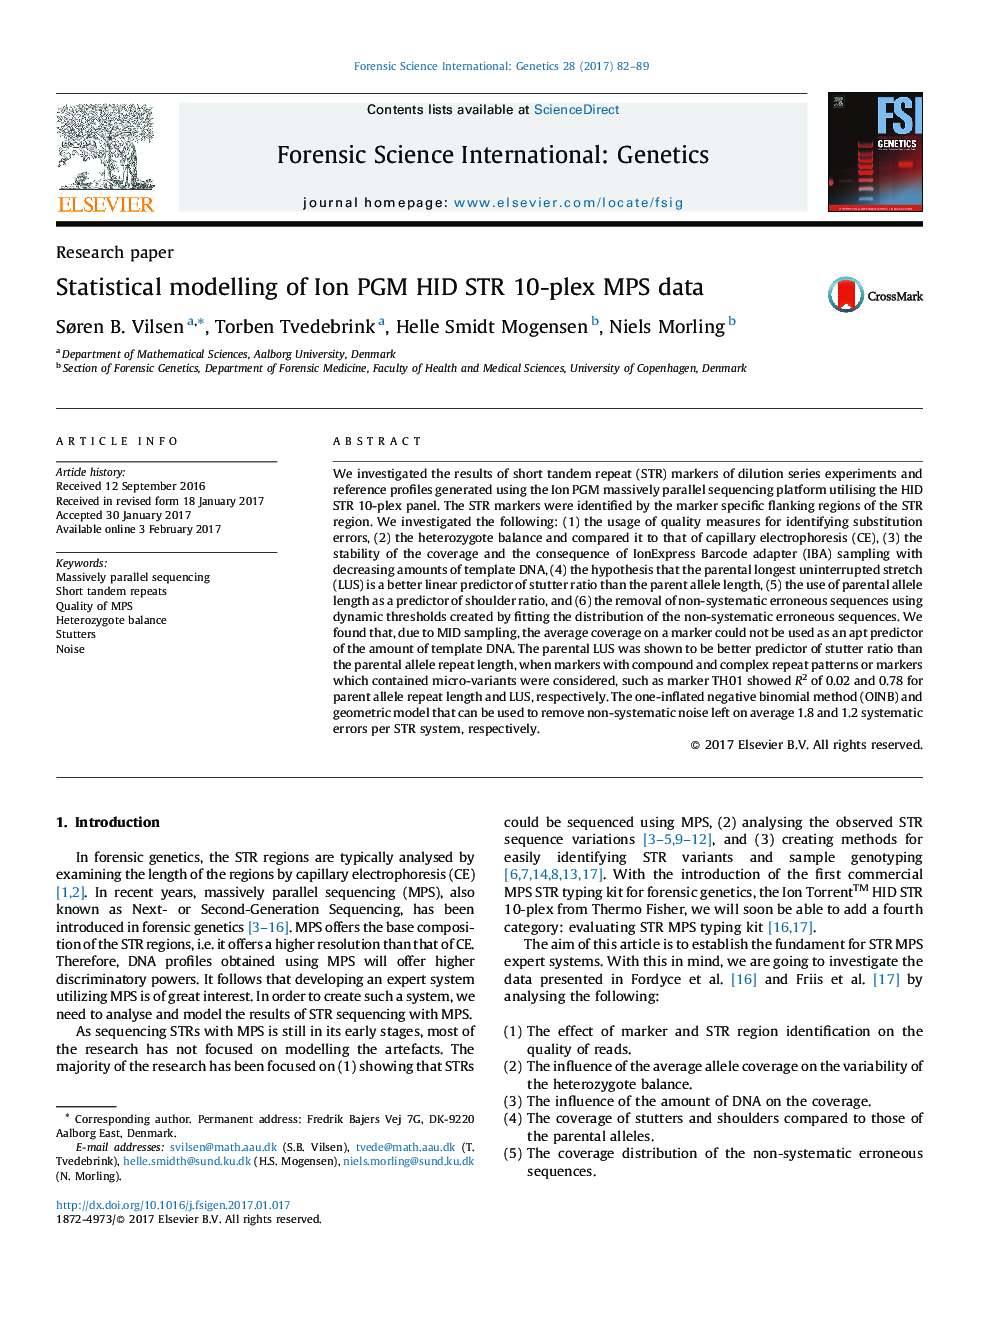 Statistical modelling of Ion PGM HID STR 10-plex MPS data